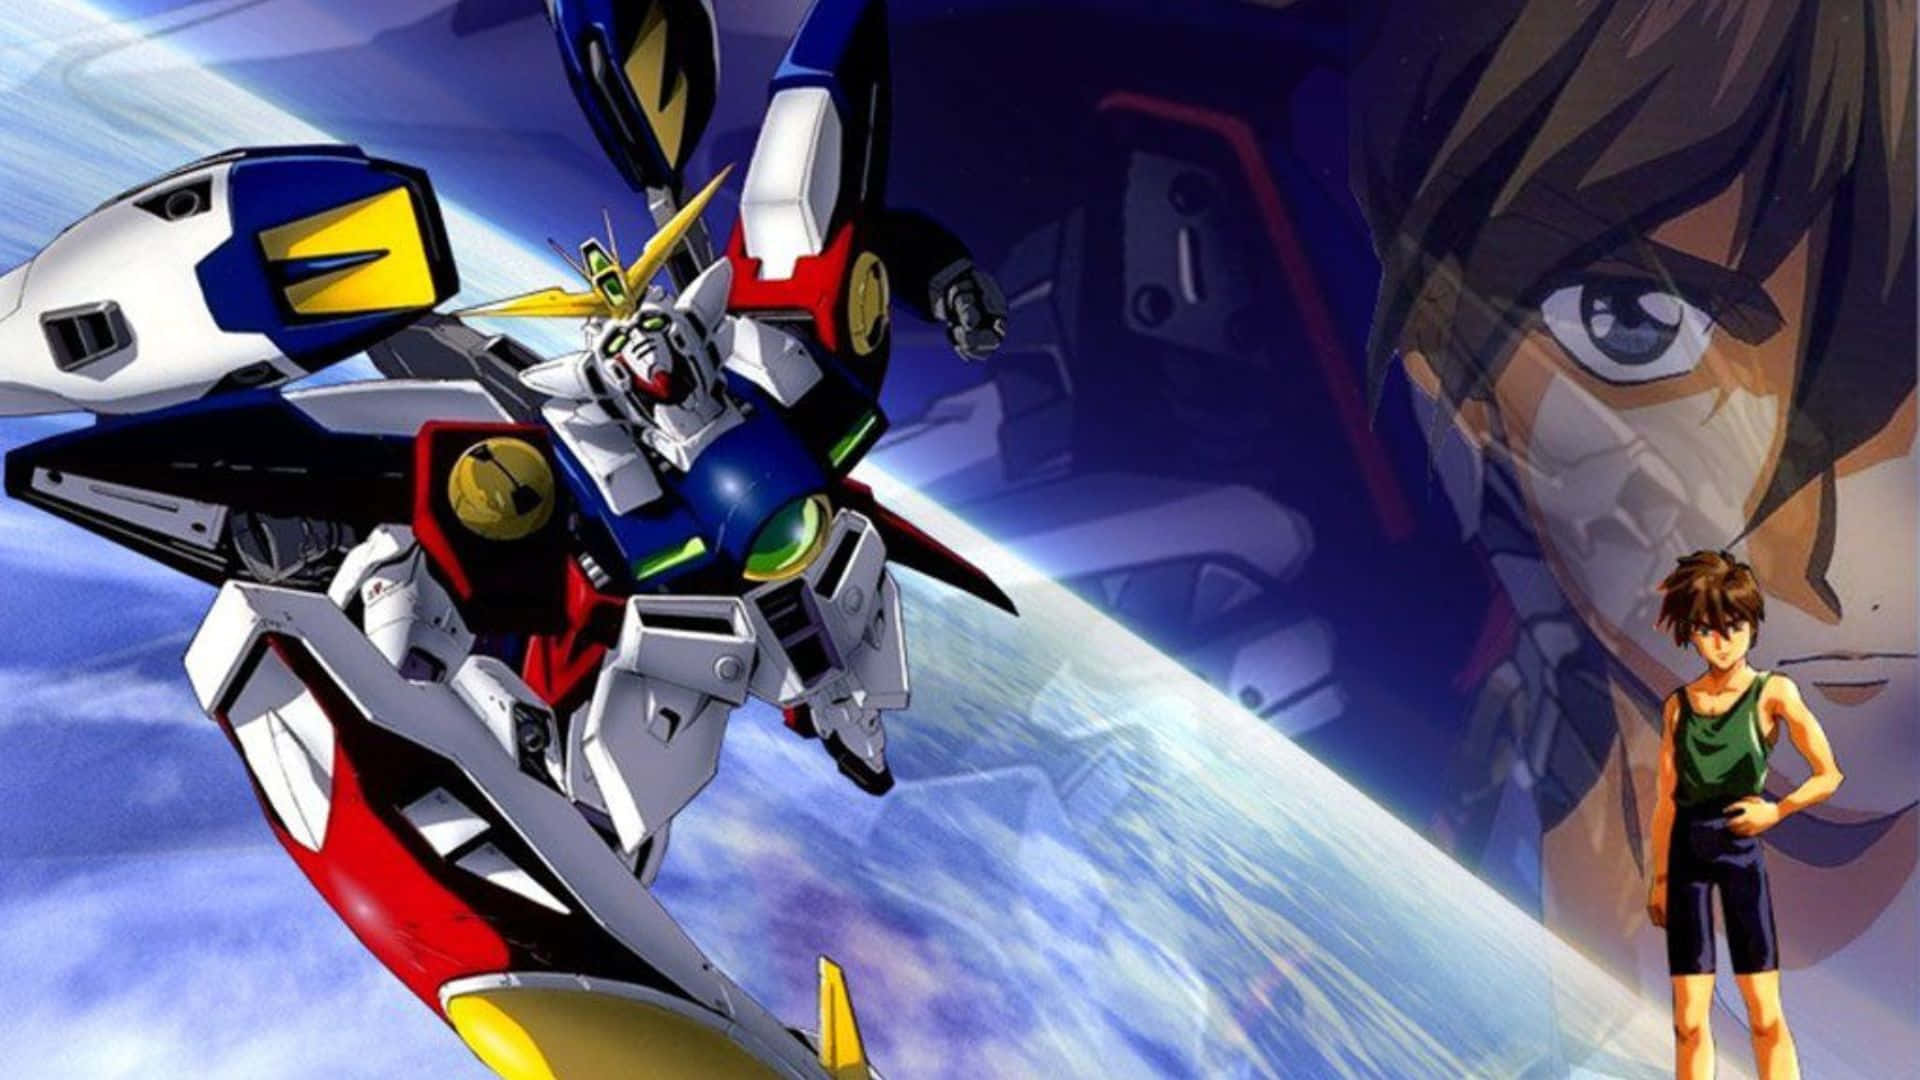 Heero Yuy, Gundam Wing protagonist poised for action Wallpaper